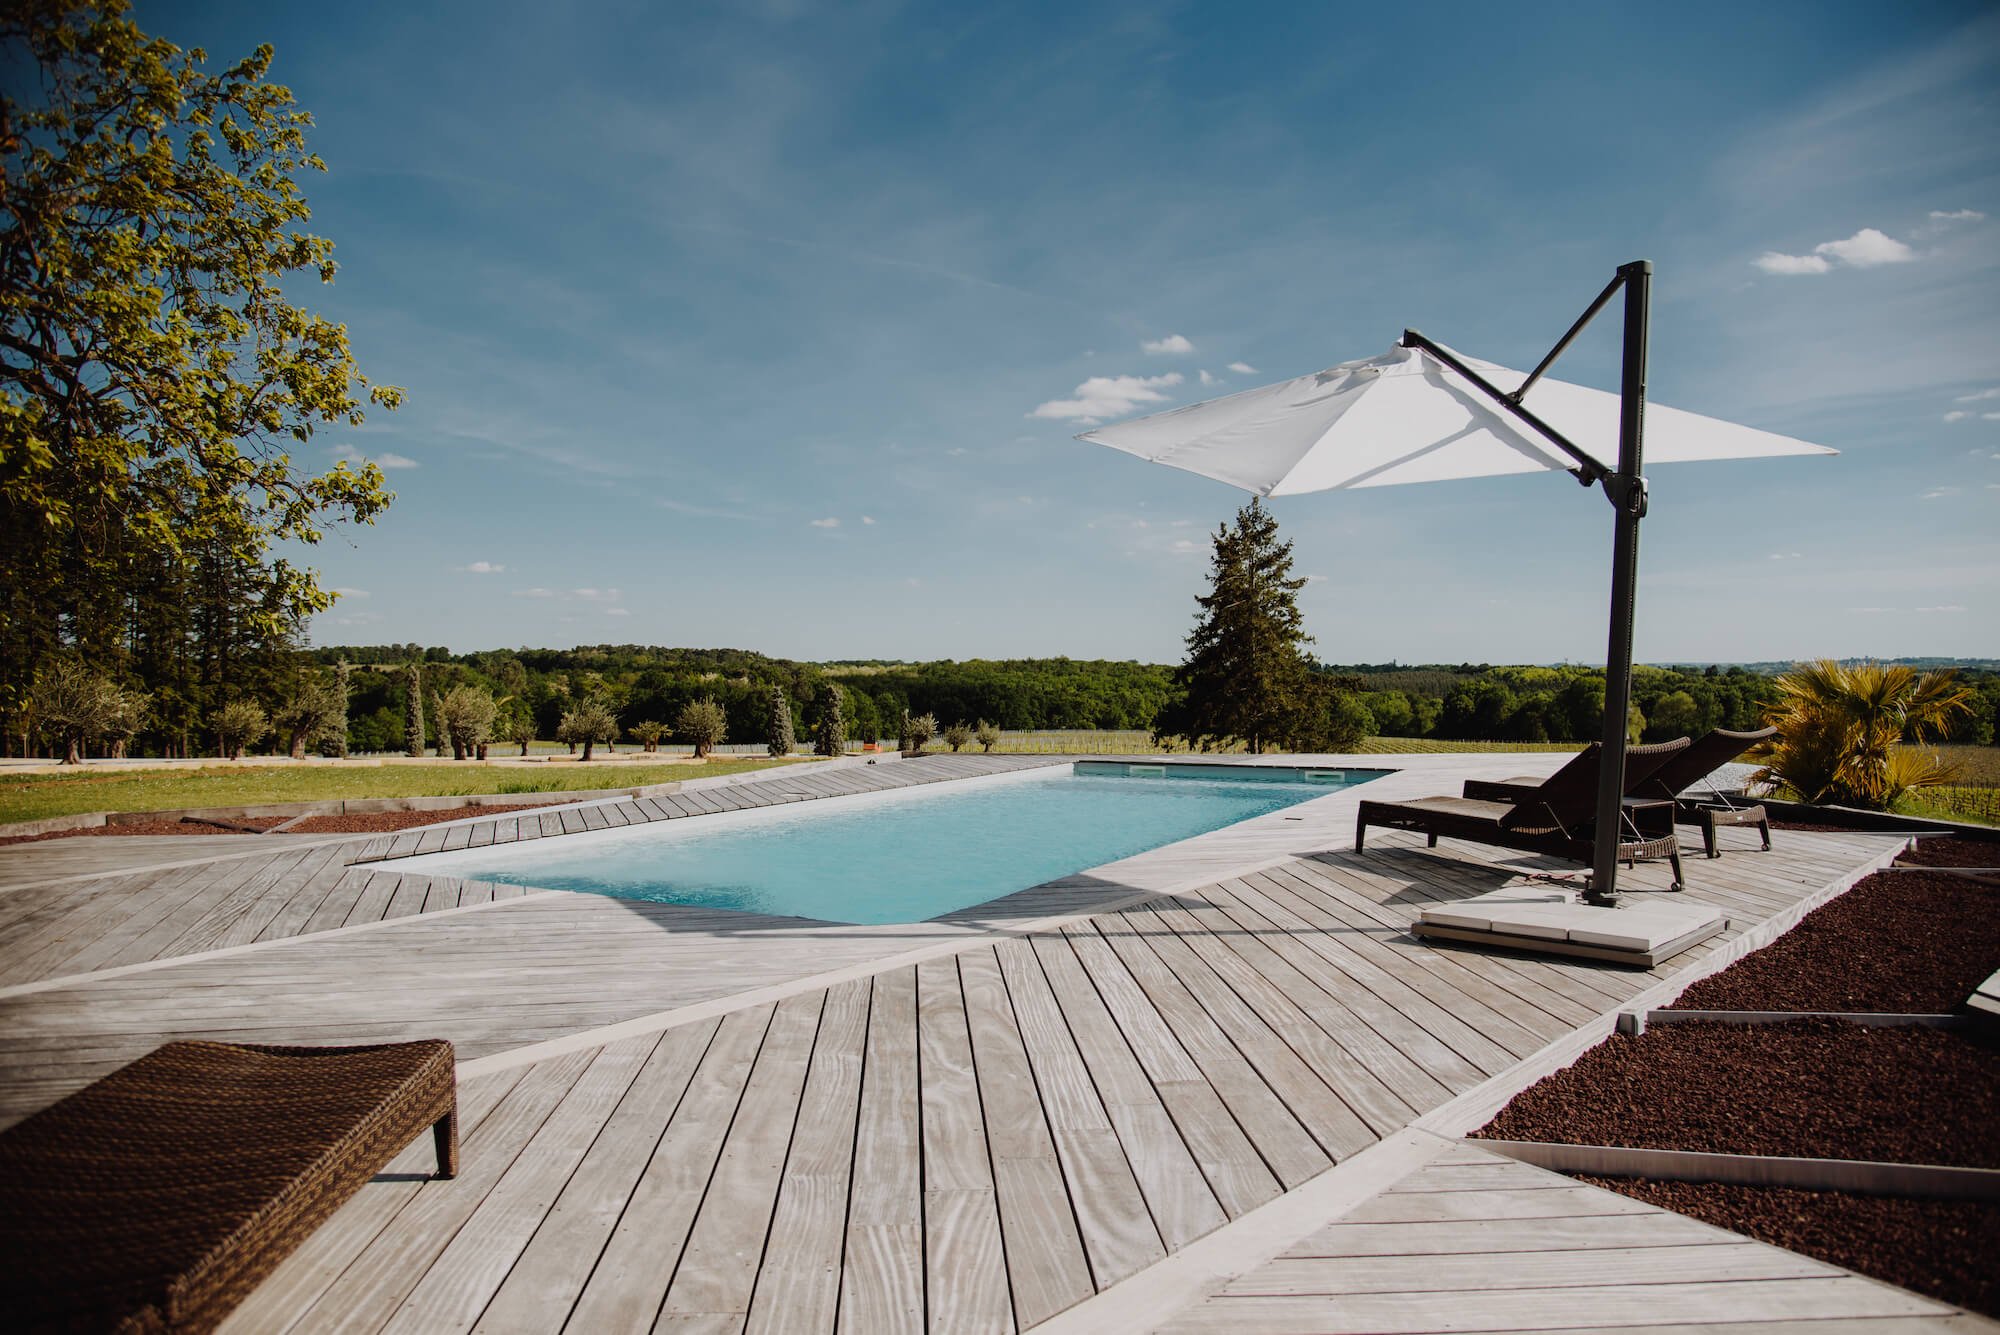 Luxury chateau in the heart of the Gironde vineyards near Bordeaux